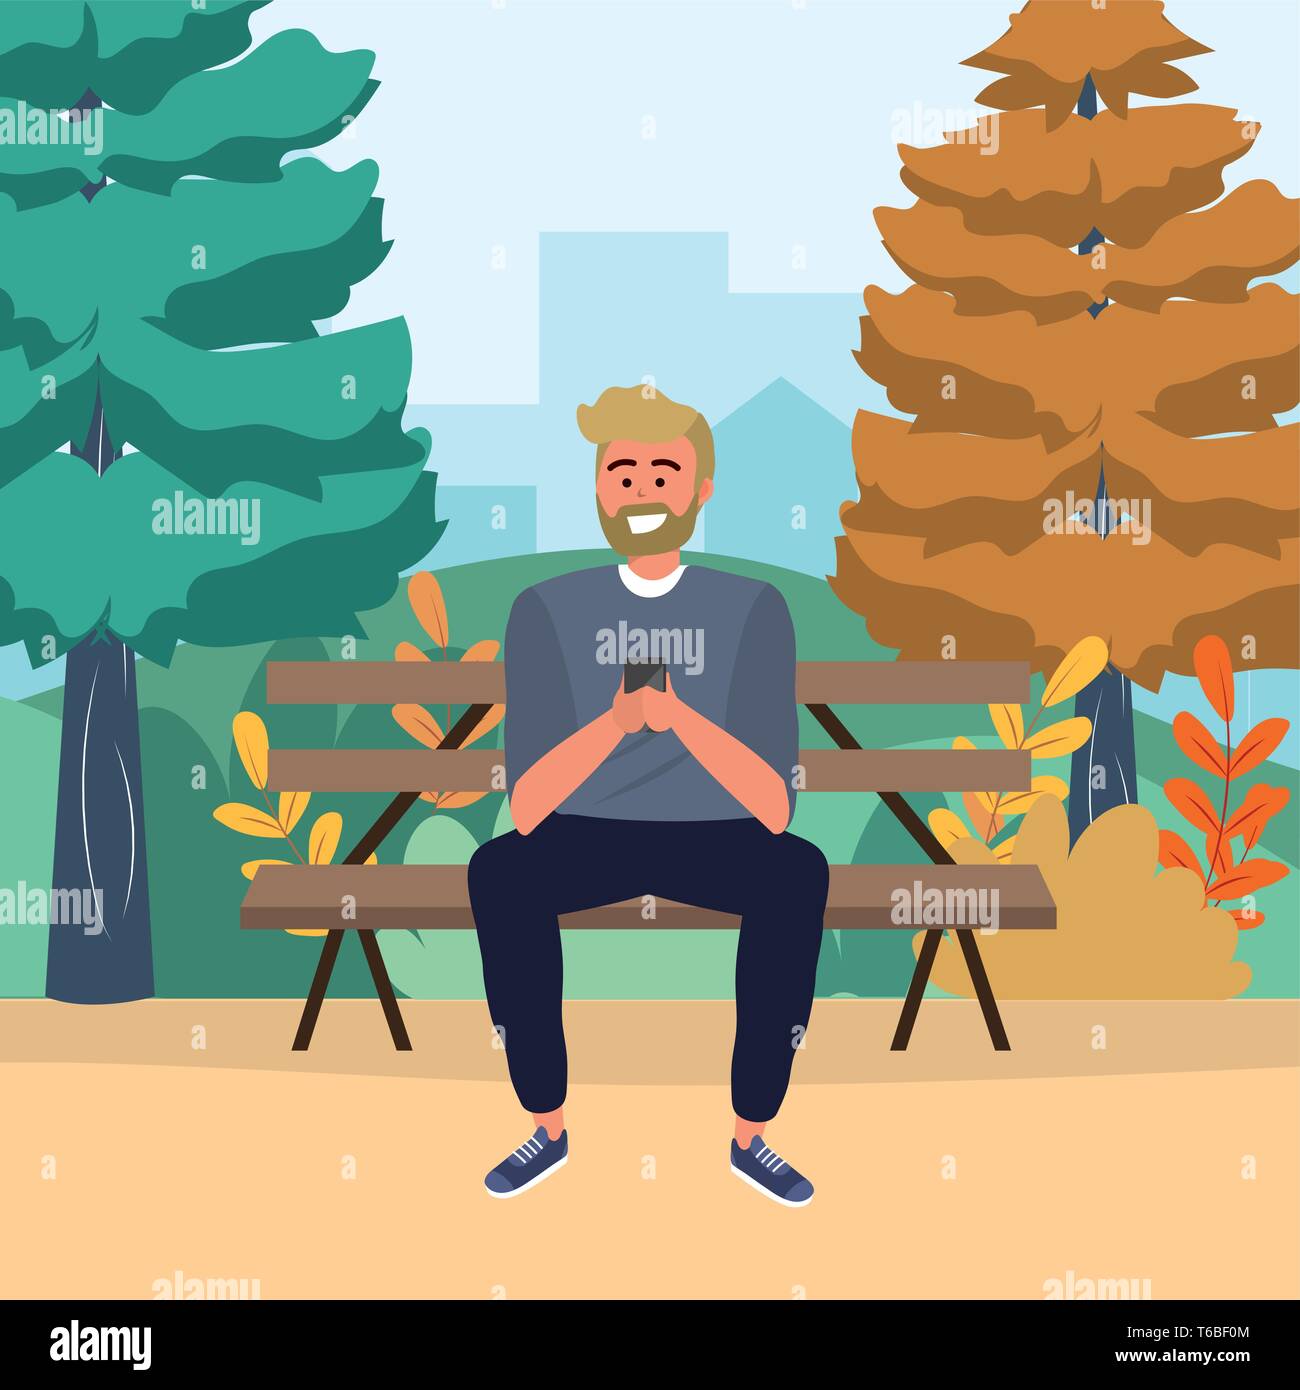 Millennial person stylish outfit sitting in park bench using smartphone texting bearded blond vector illustration graphic design Stock Vector